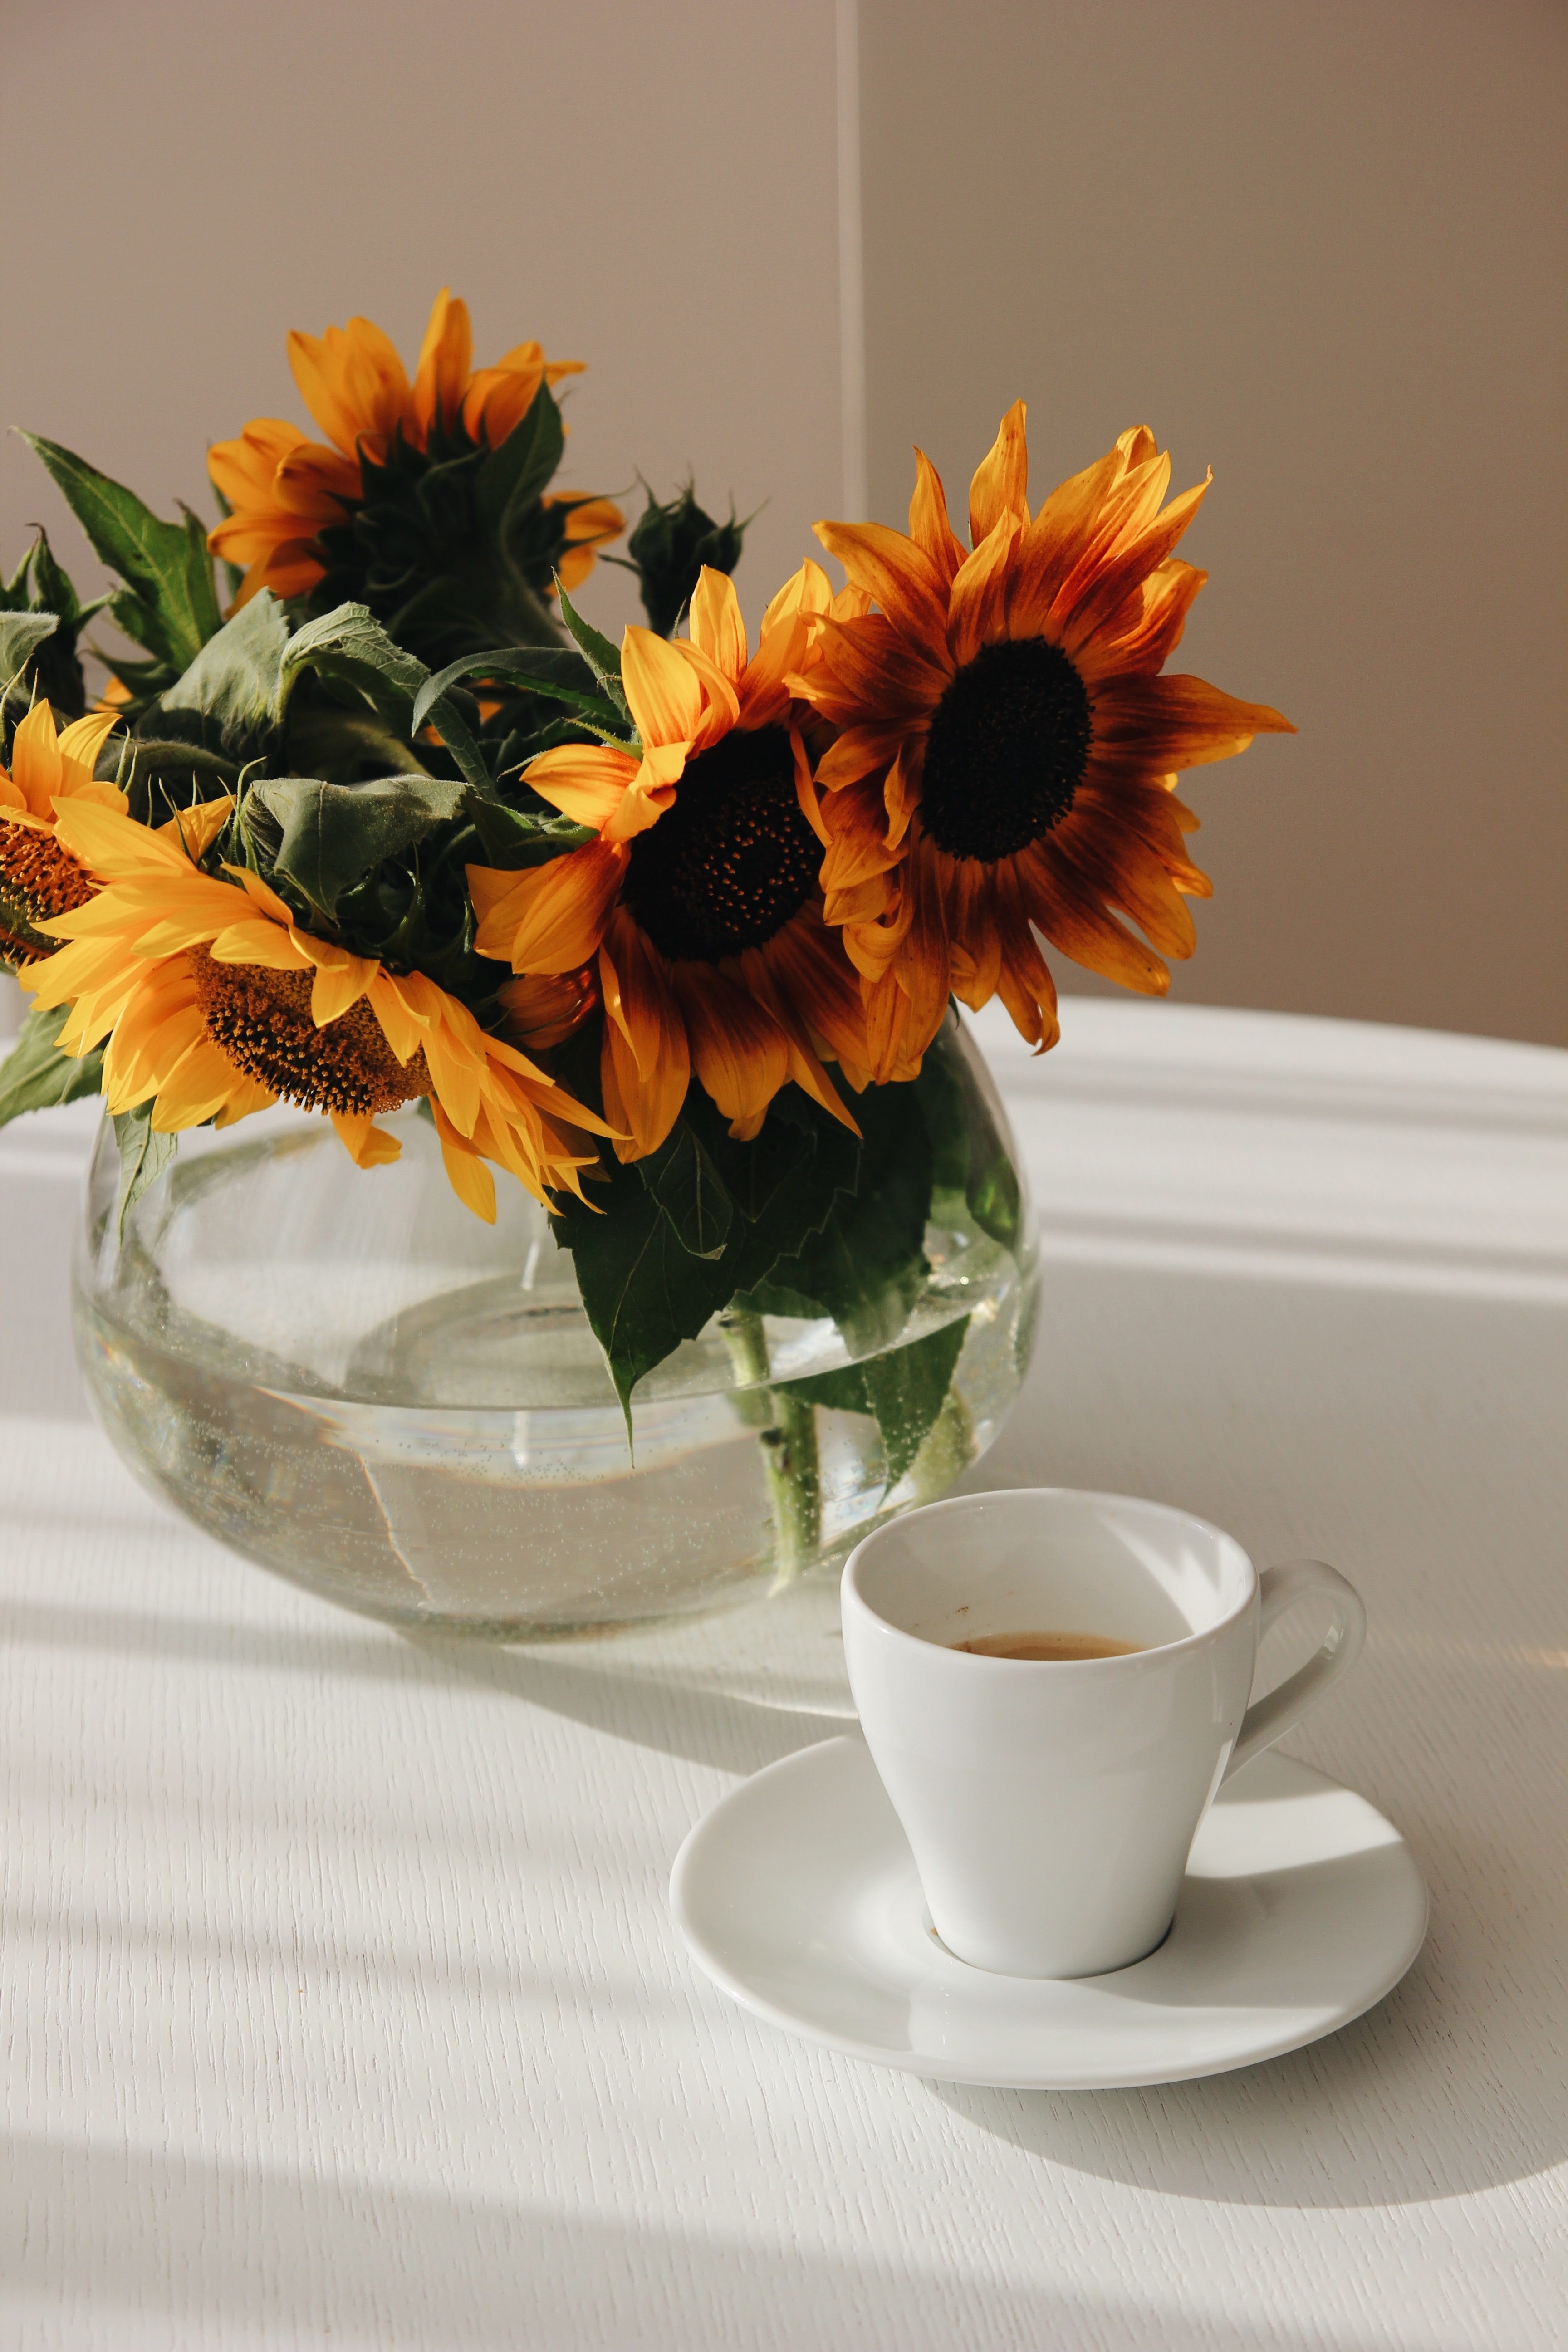 sunflowers, flowers, cup, bouquet, table, vase Free Stock Photo